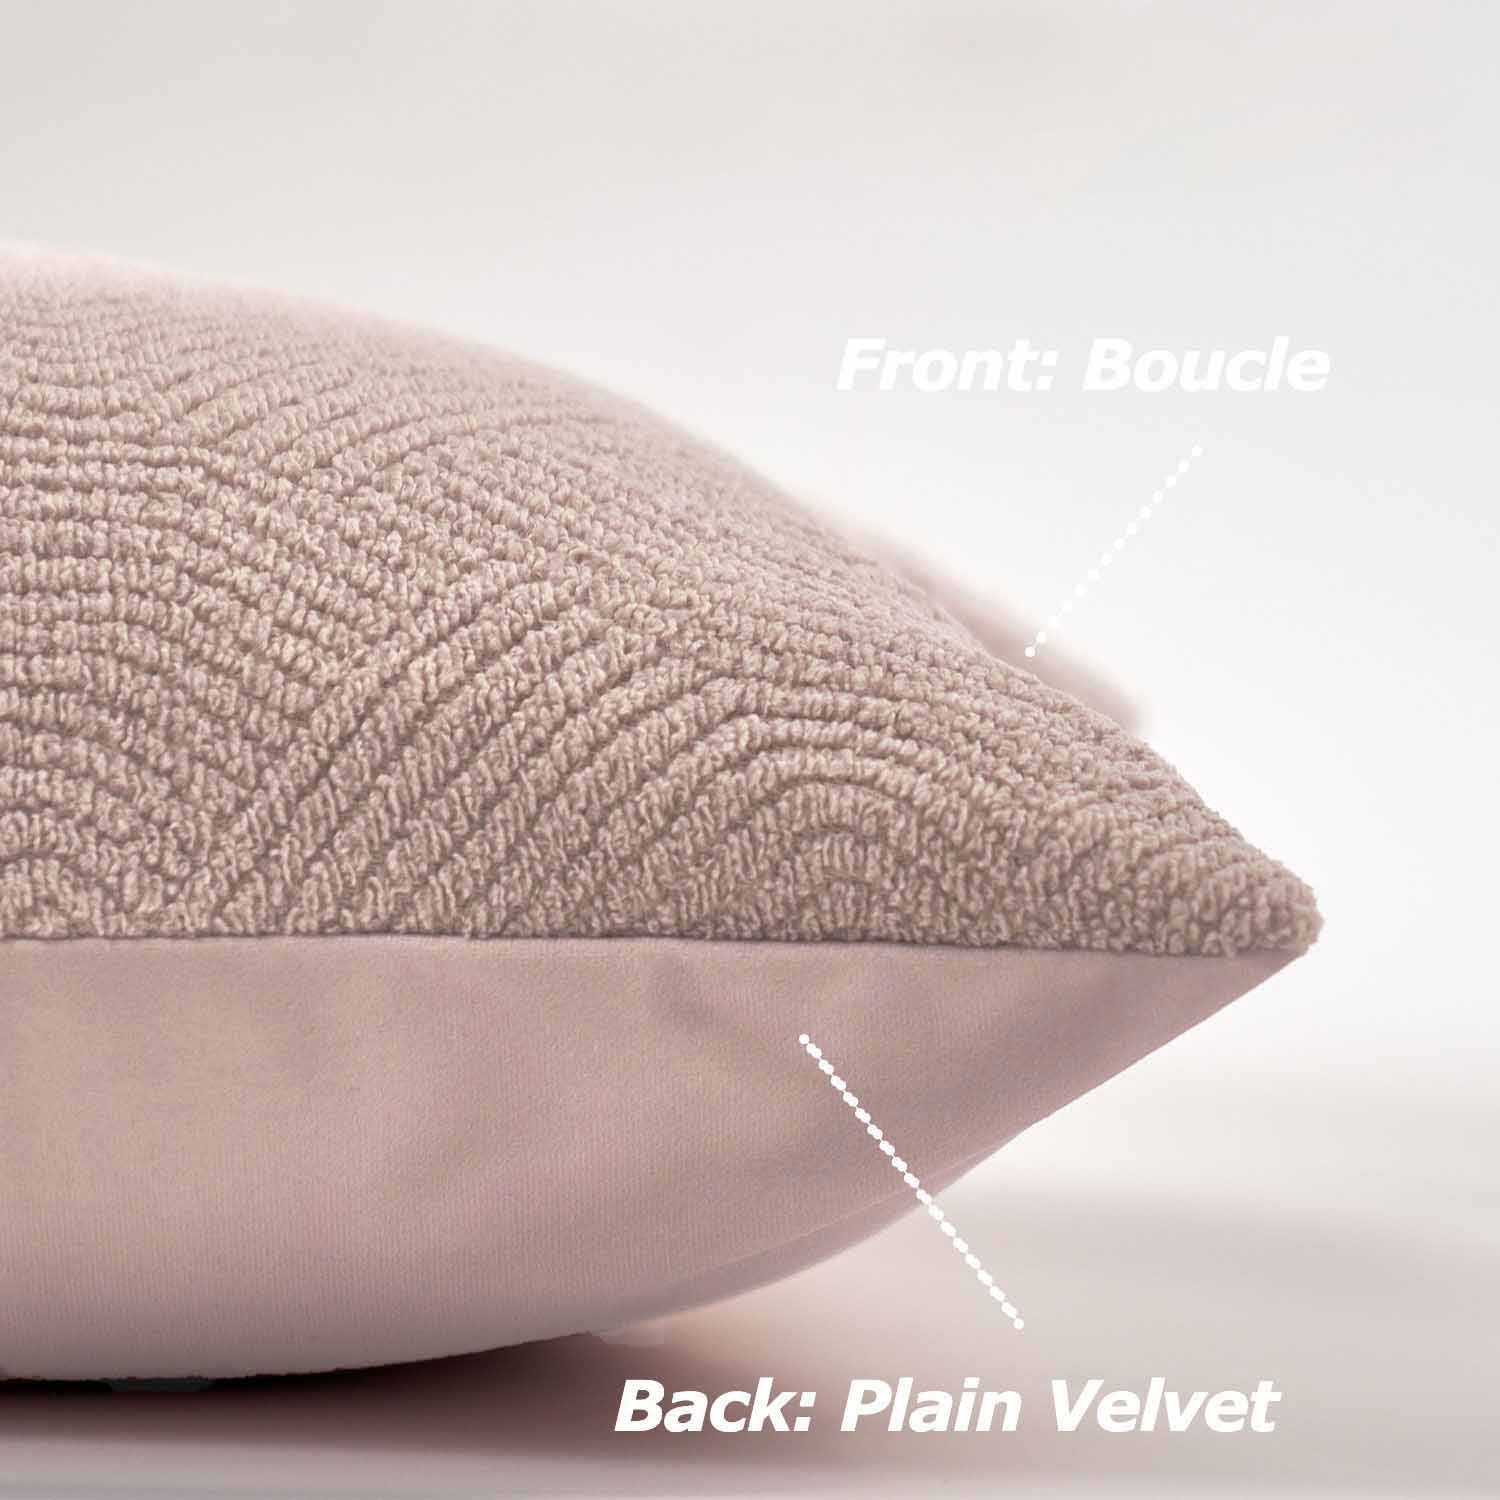 Cecina Geometric Soft Boucle Pillow Cover-